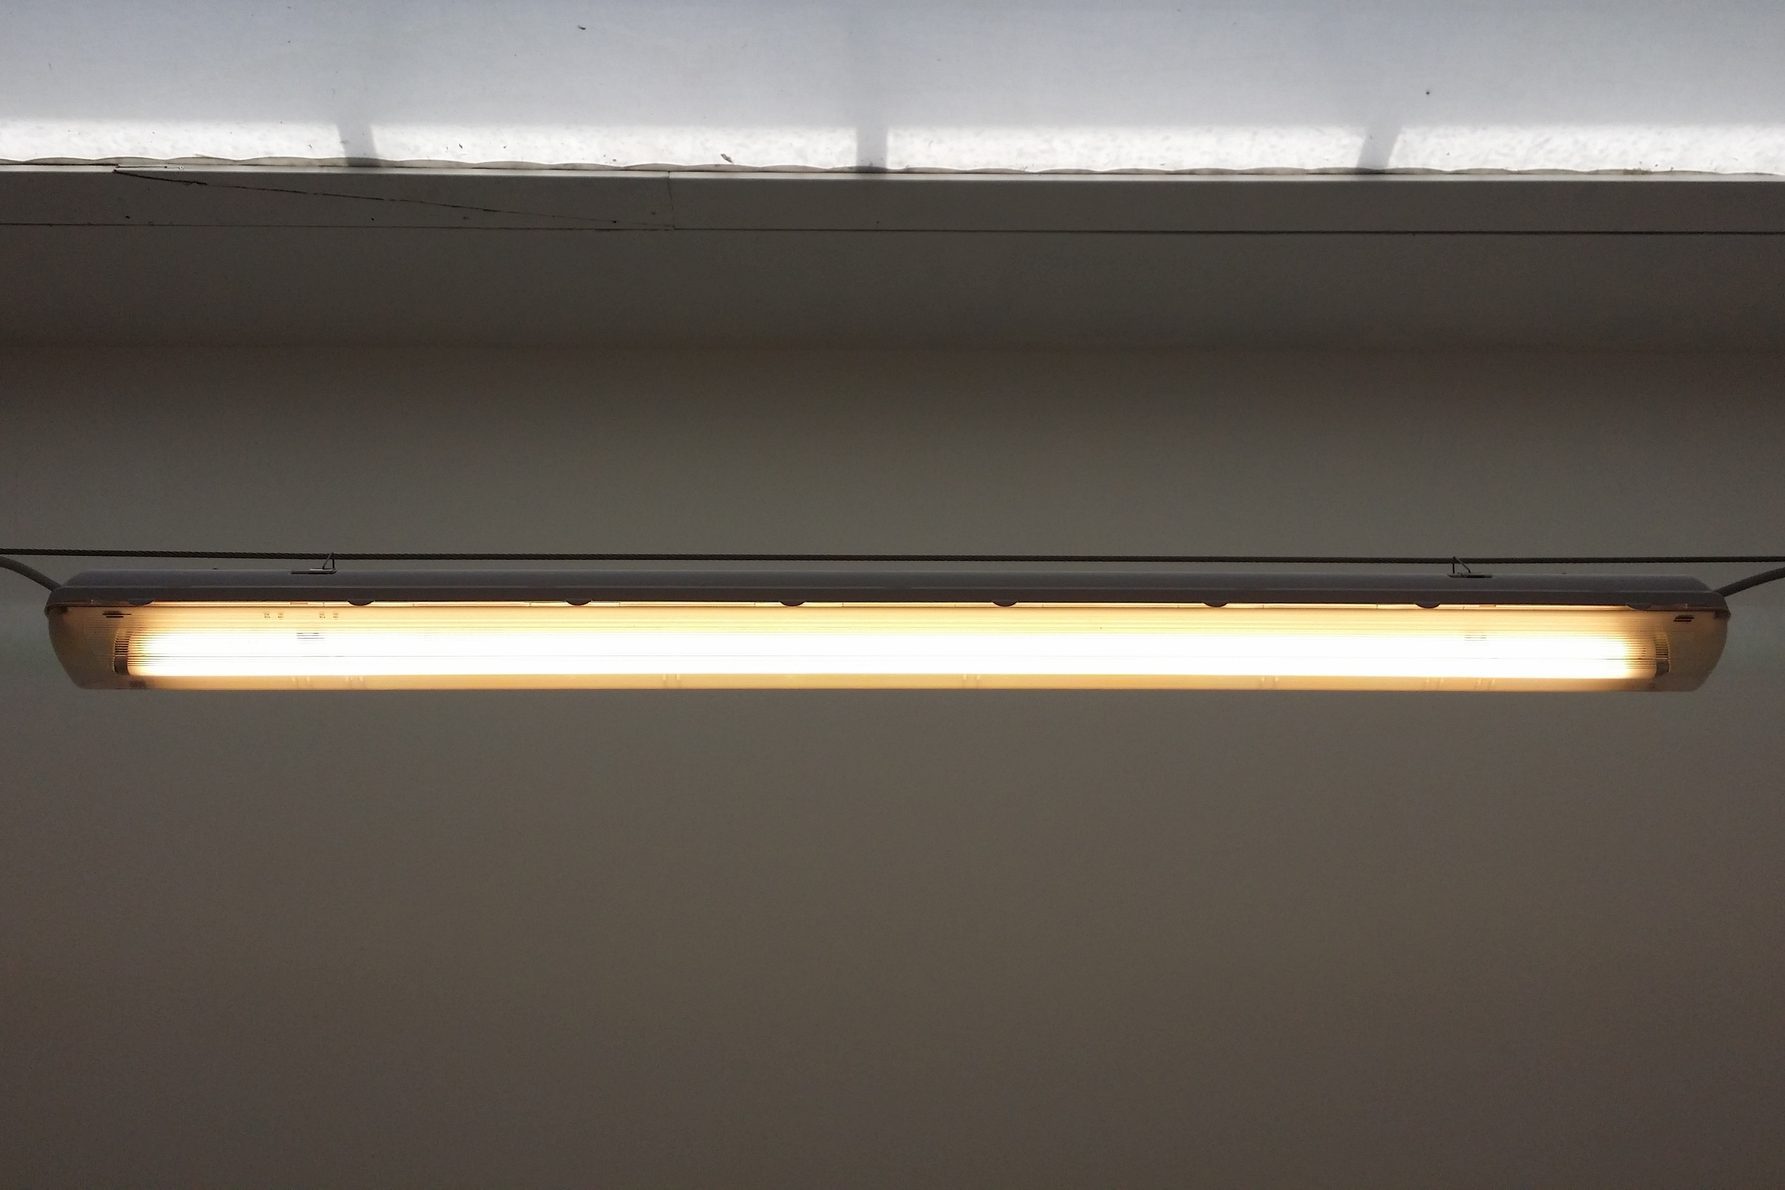 Low Angle View Of Illuminated Fluorescent Light On Wall